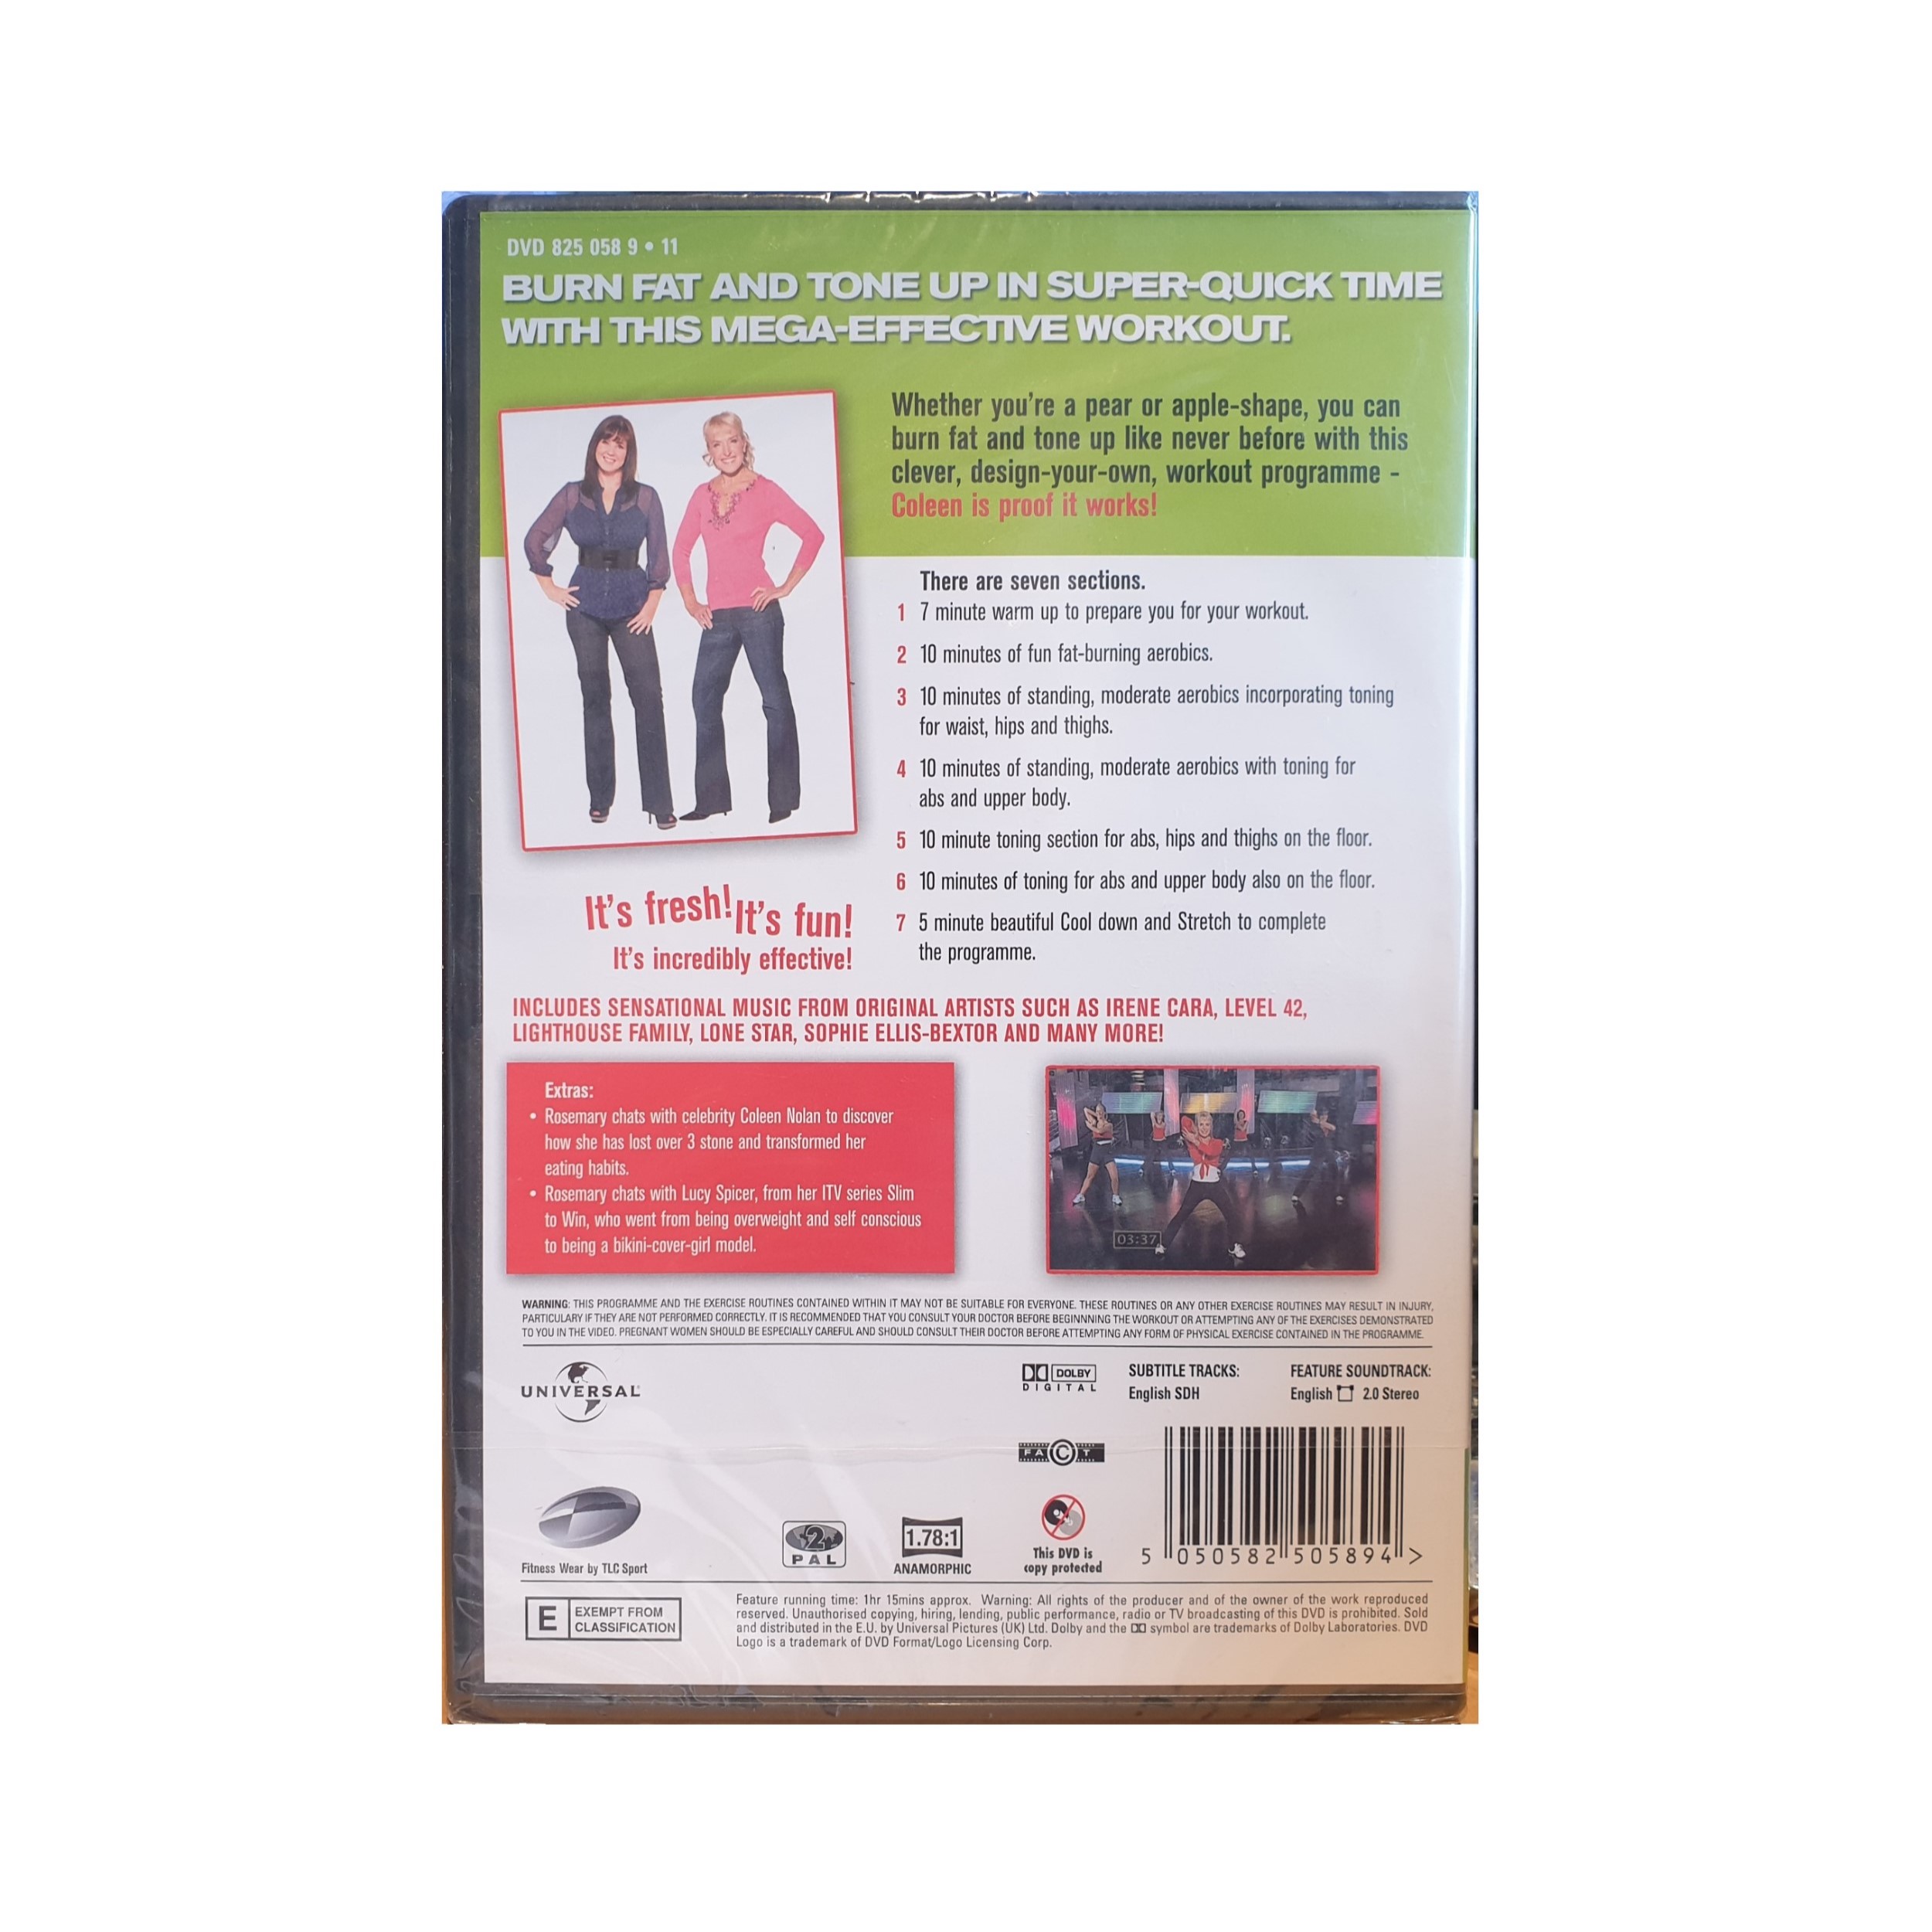 Image of the back cover of Rosemary Conley's Brand New You Workout DVD